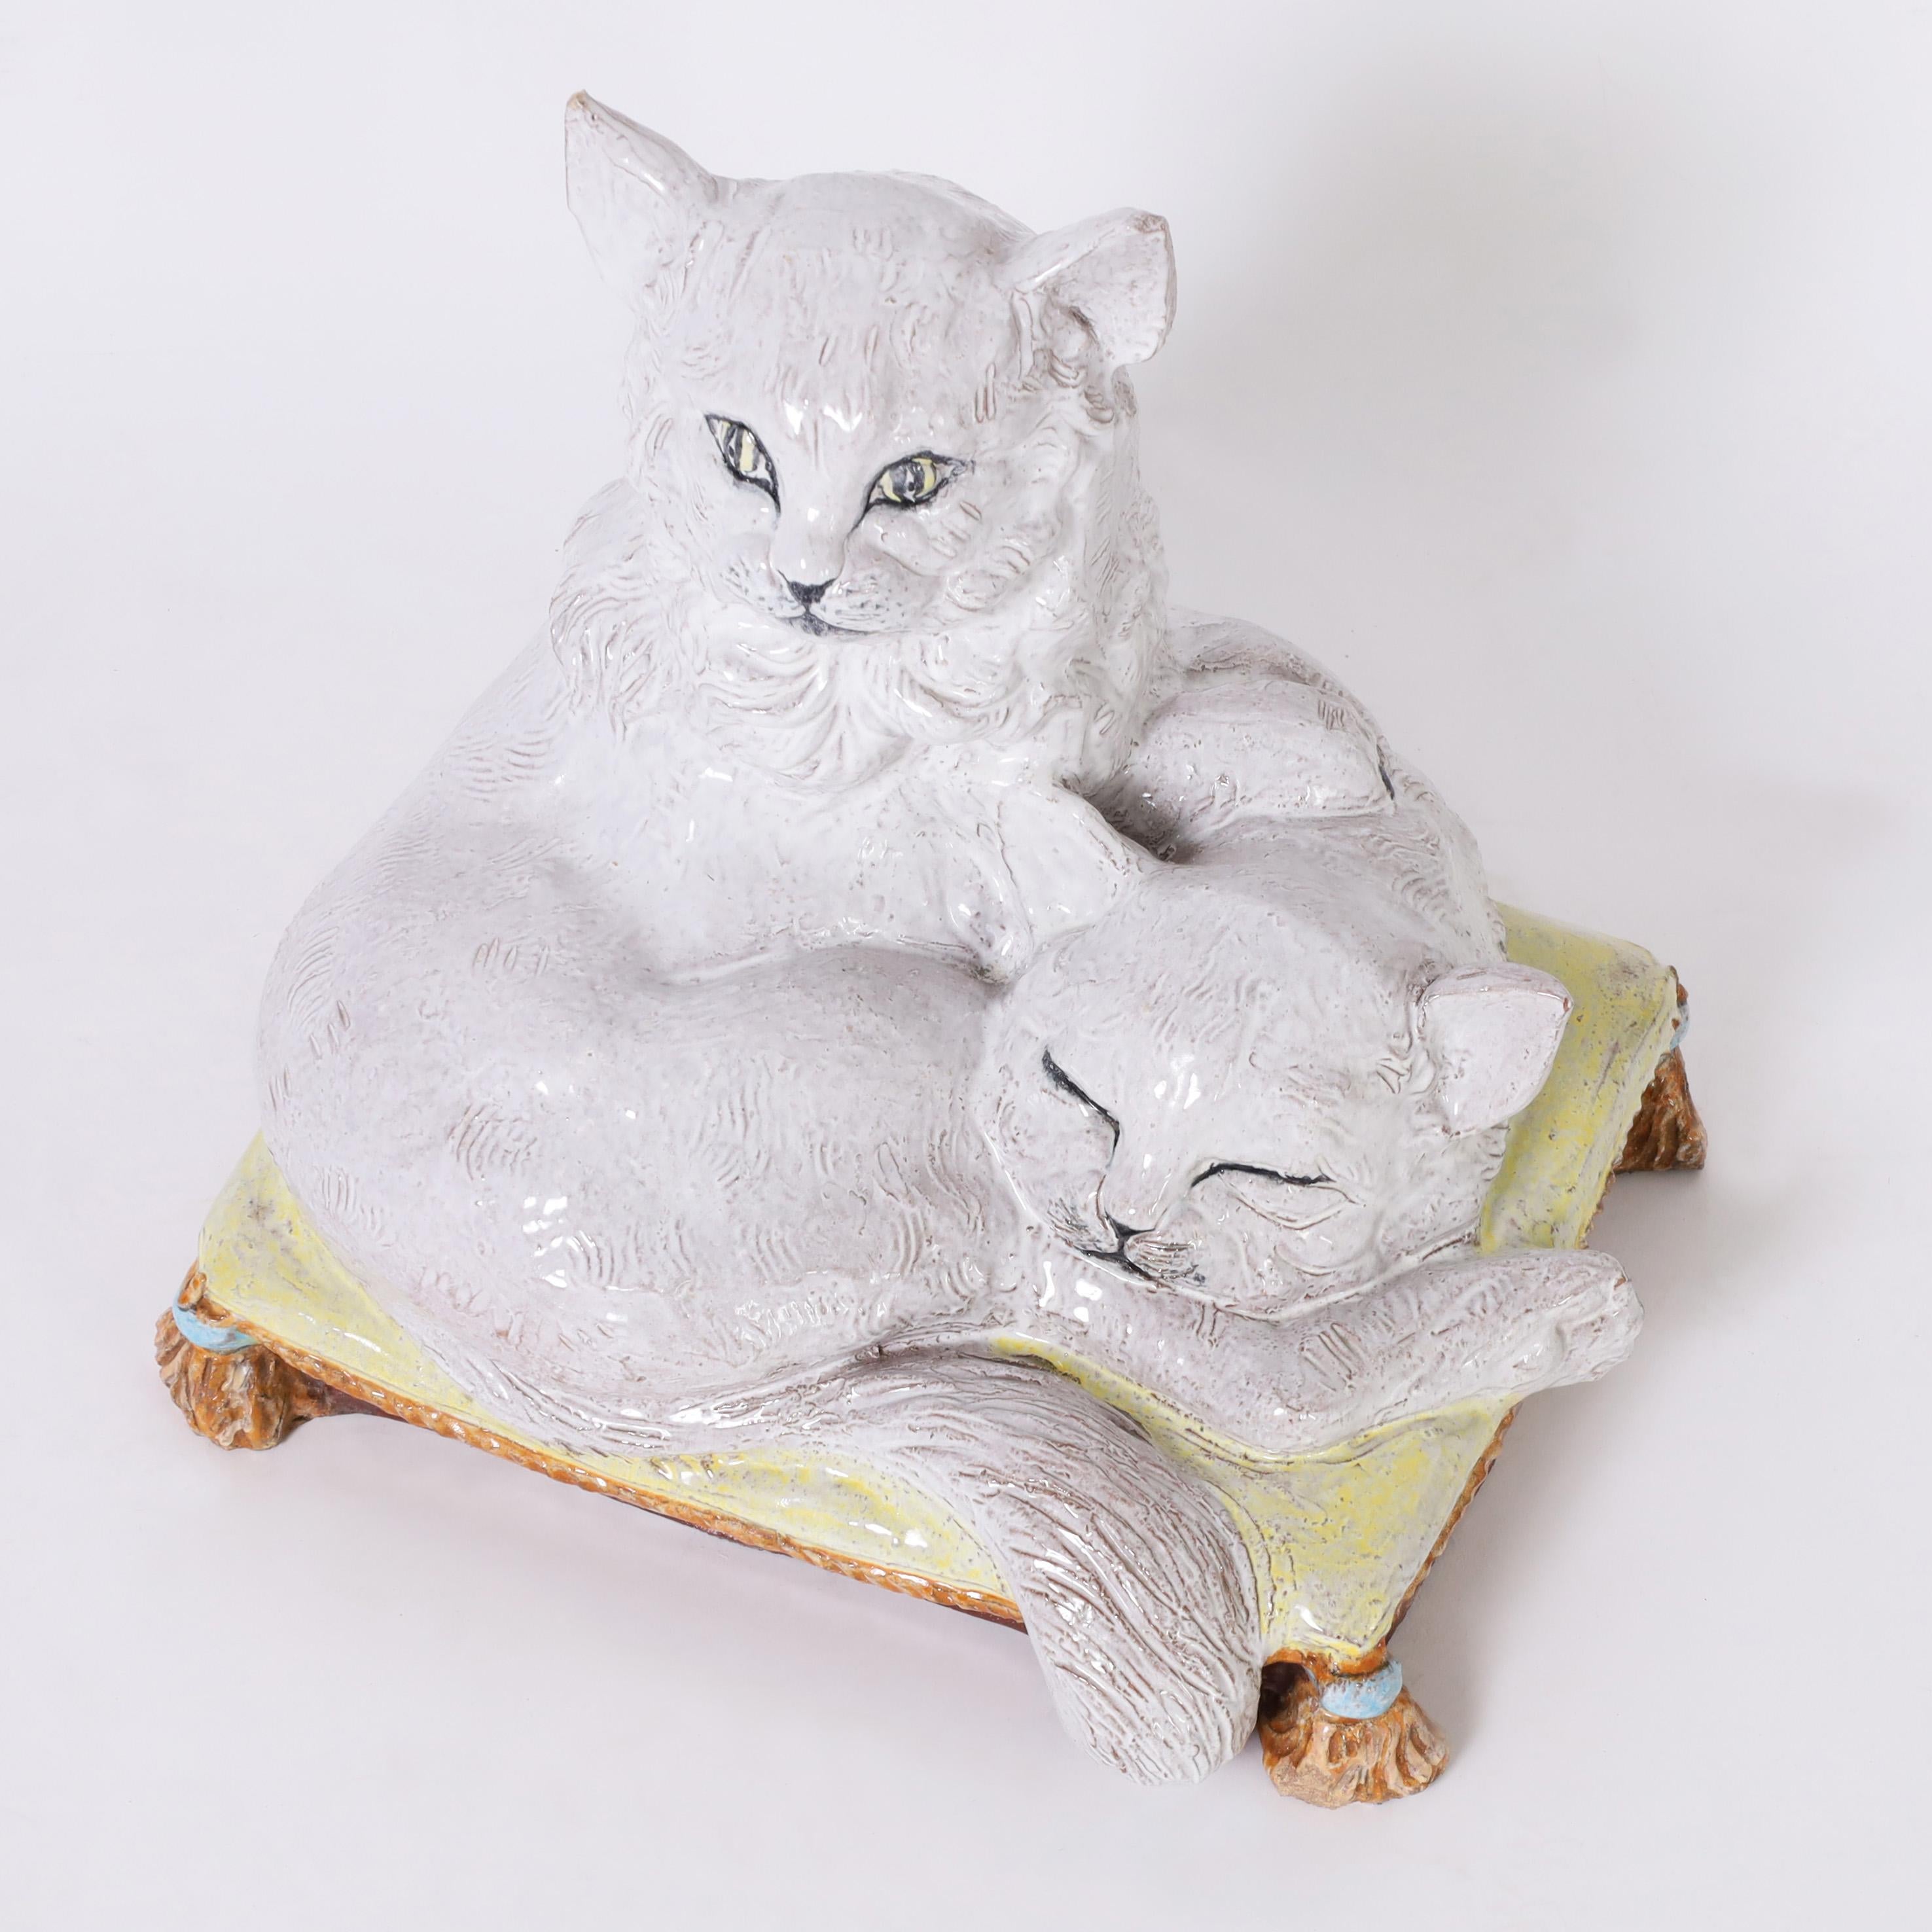 Vintage Italian Terra Cotta Two Cats on a Pillow - Other Art Style Sculpture by Unknown